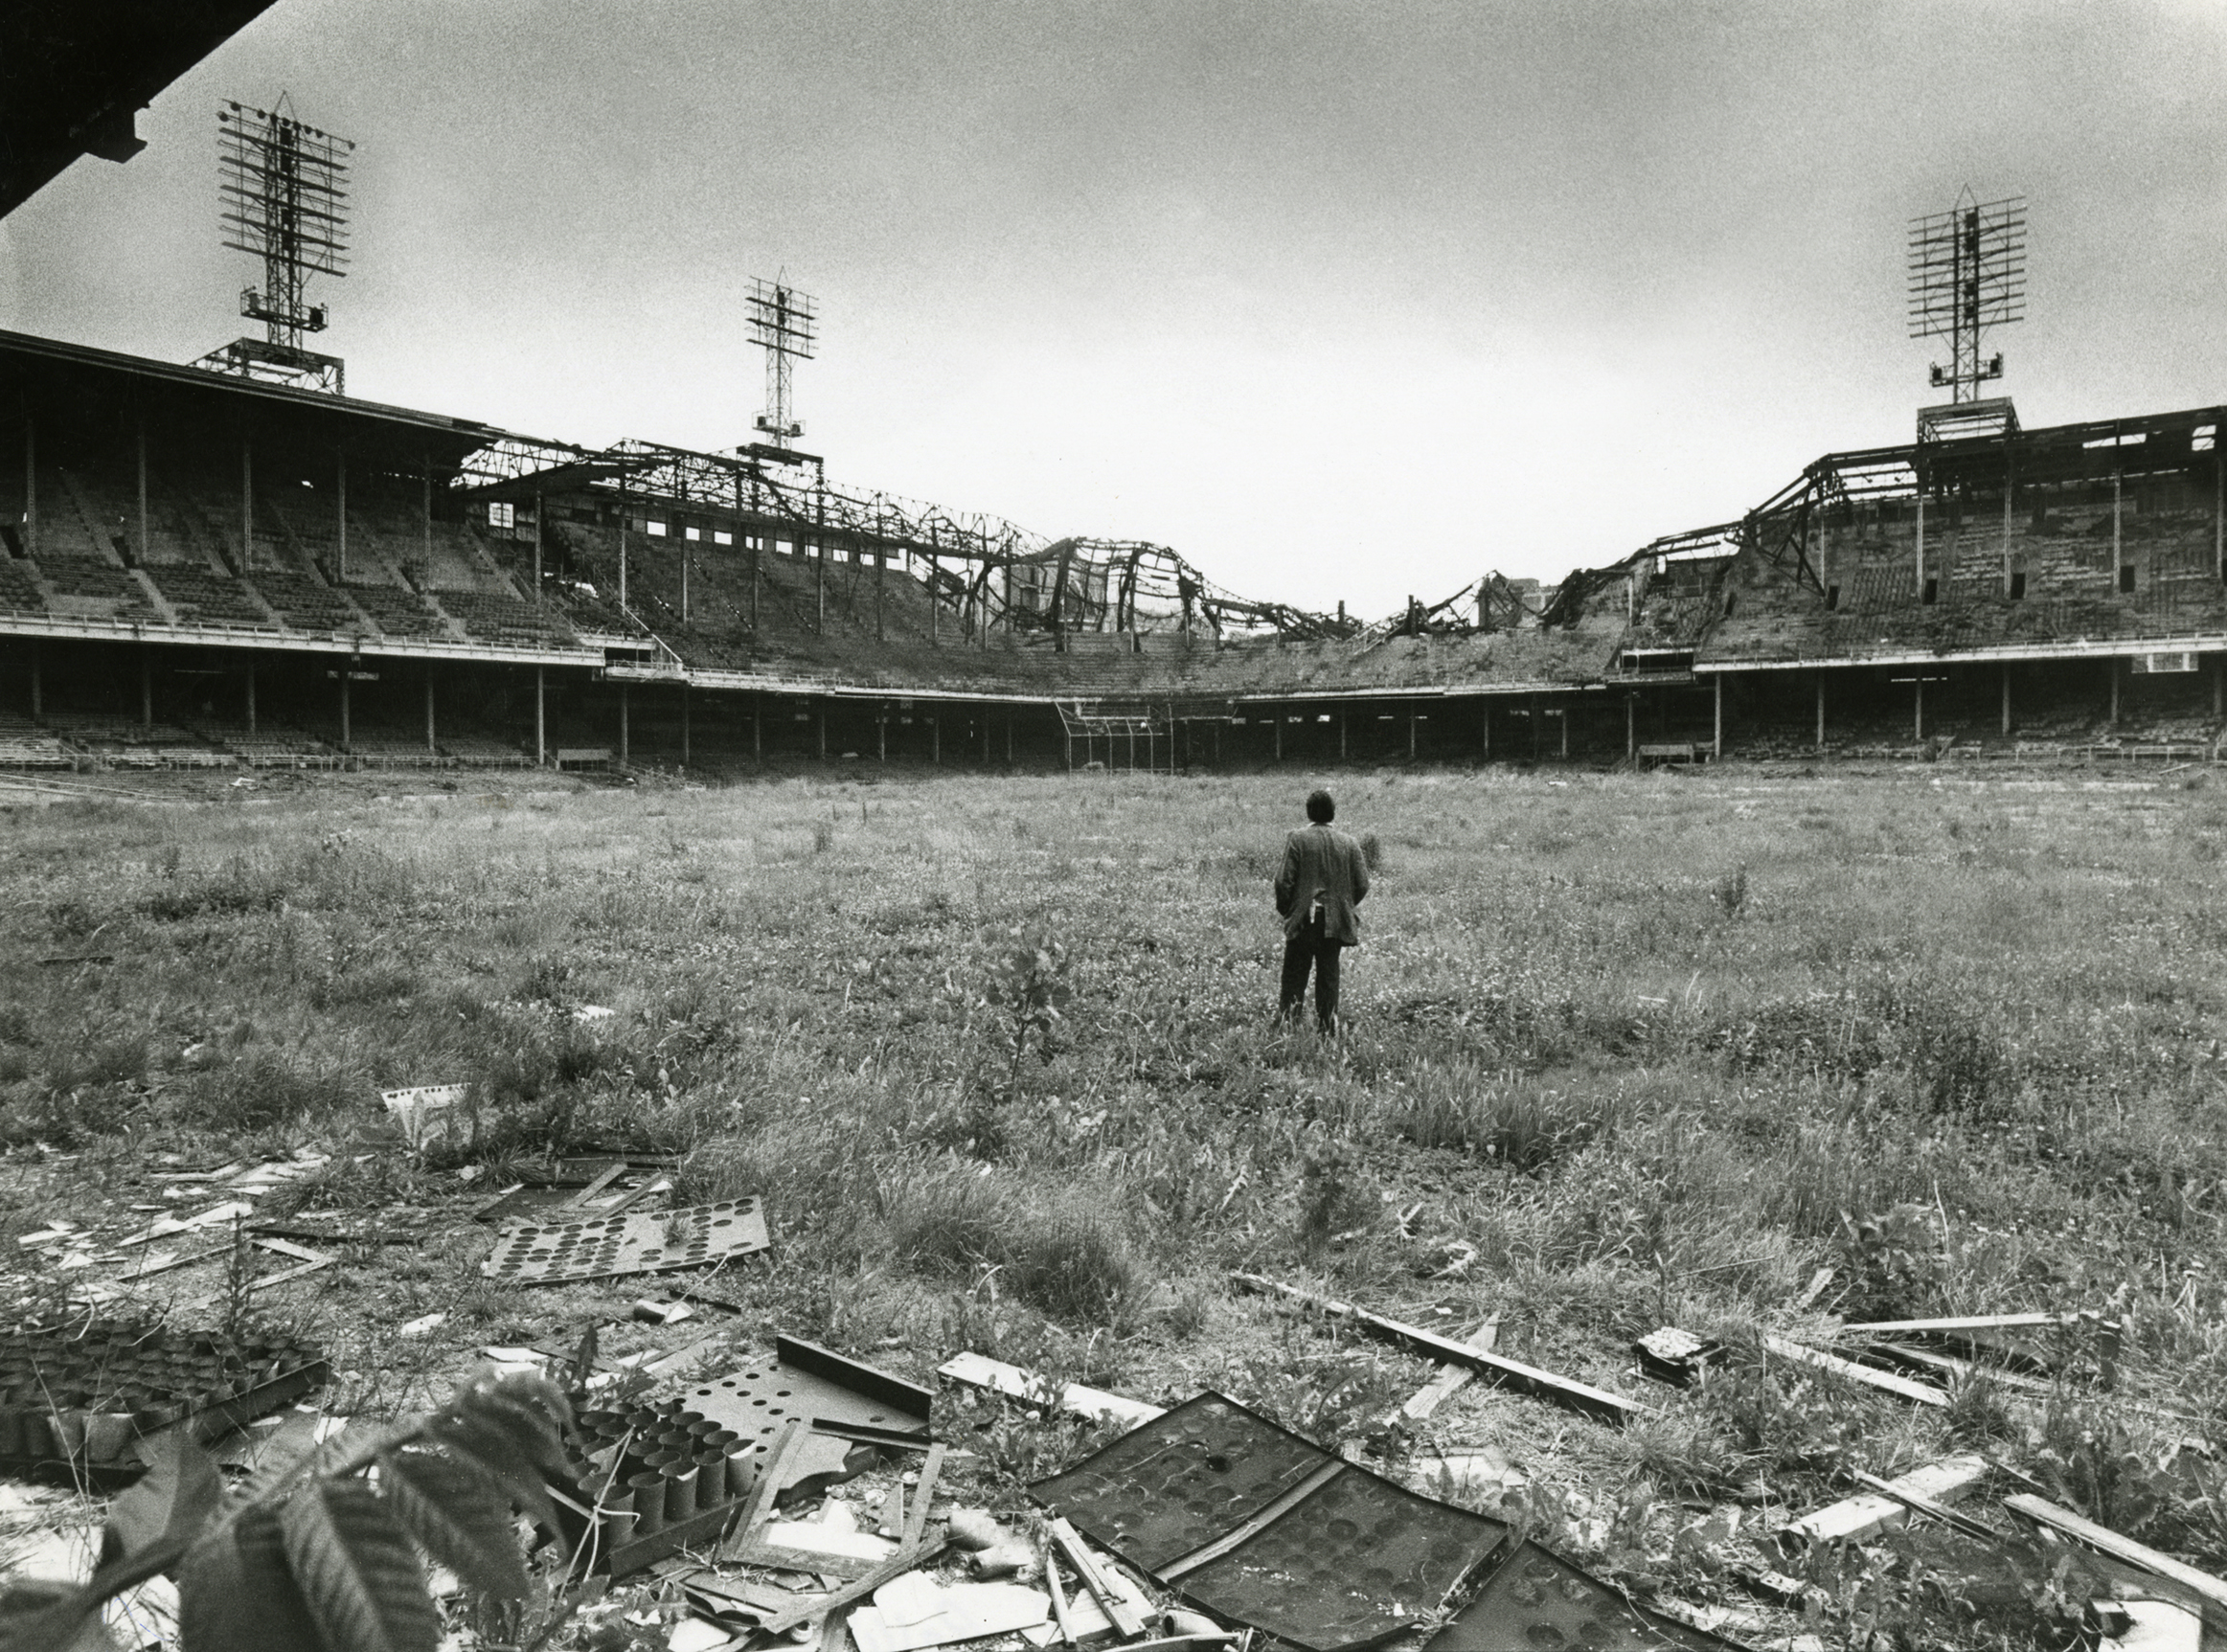 Photographer Bob Bartosz takes a self-portrait amidst the weeds, debris and ruins of Philadelphia's abandoned Connie Mack Stadium, 65 years after it opened as Shibe Park and nearly four years after it hosted its final big league game, June 1974.